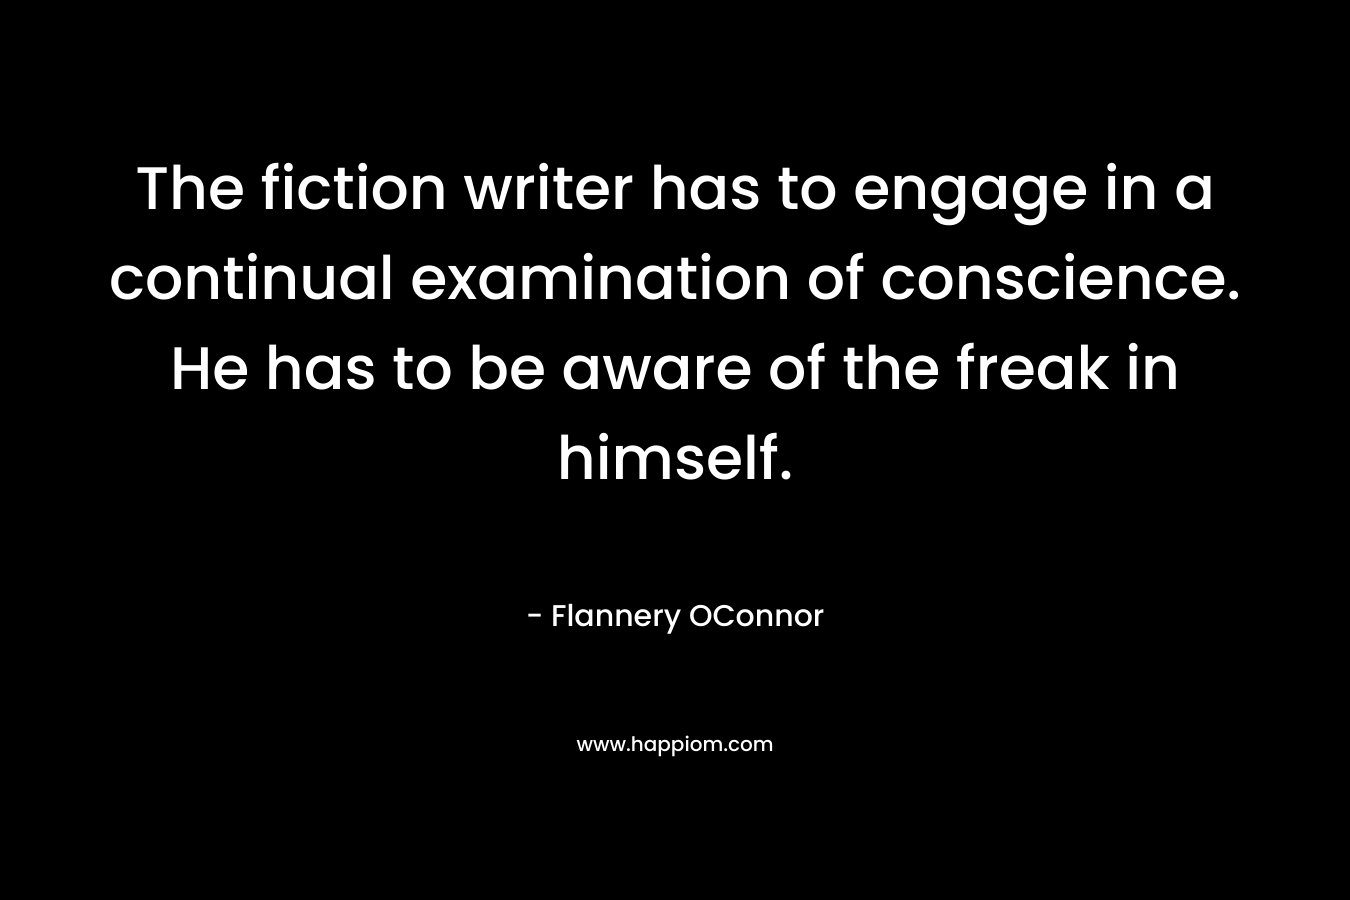 The fiction writer has to engage in a continual examination of conscience. He has to be aware of the freak in himself. – Flannery OConnor